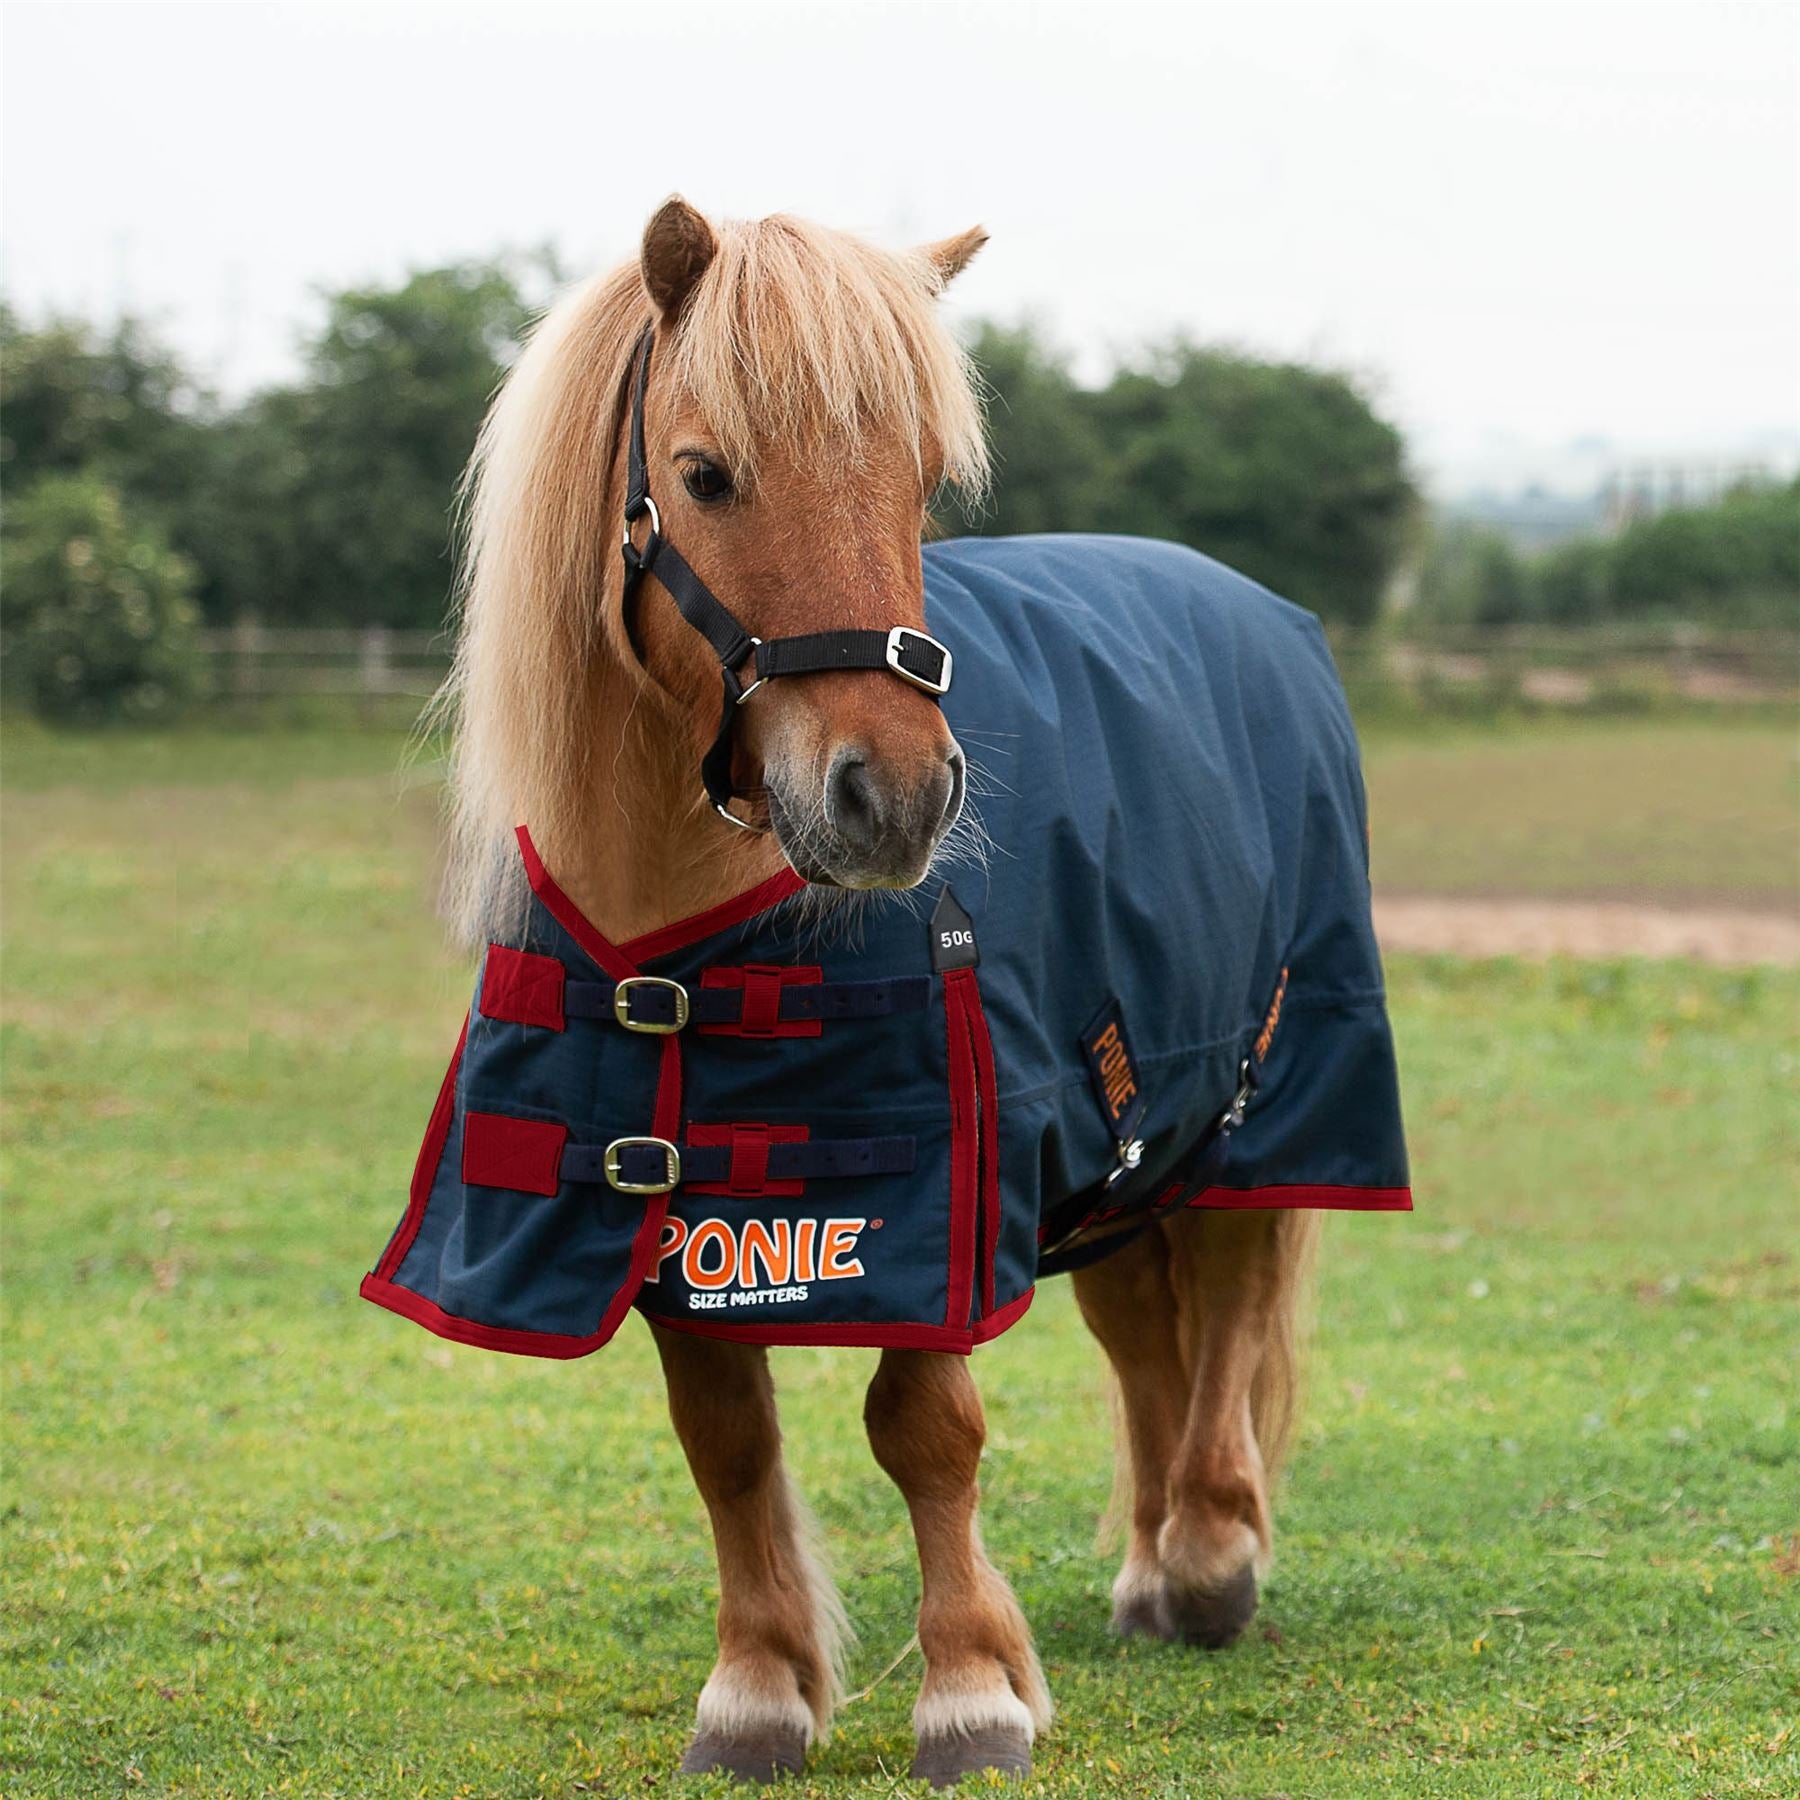 Gallop Equestrian Ponie 50 Turnout Rug - Just Horse Riders